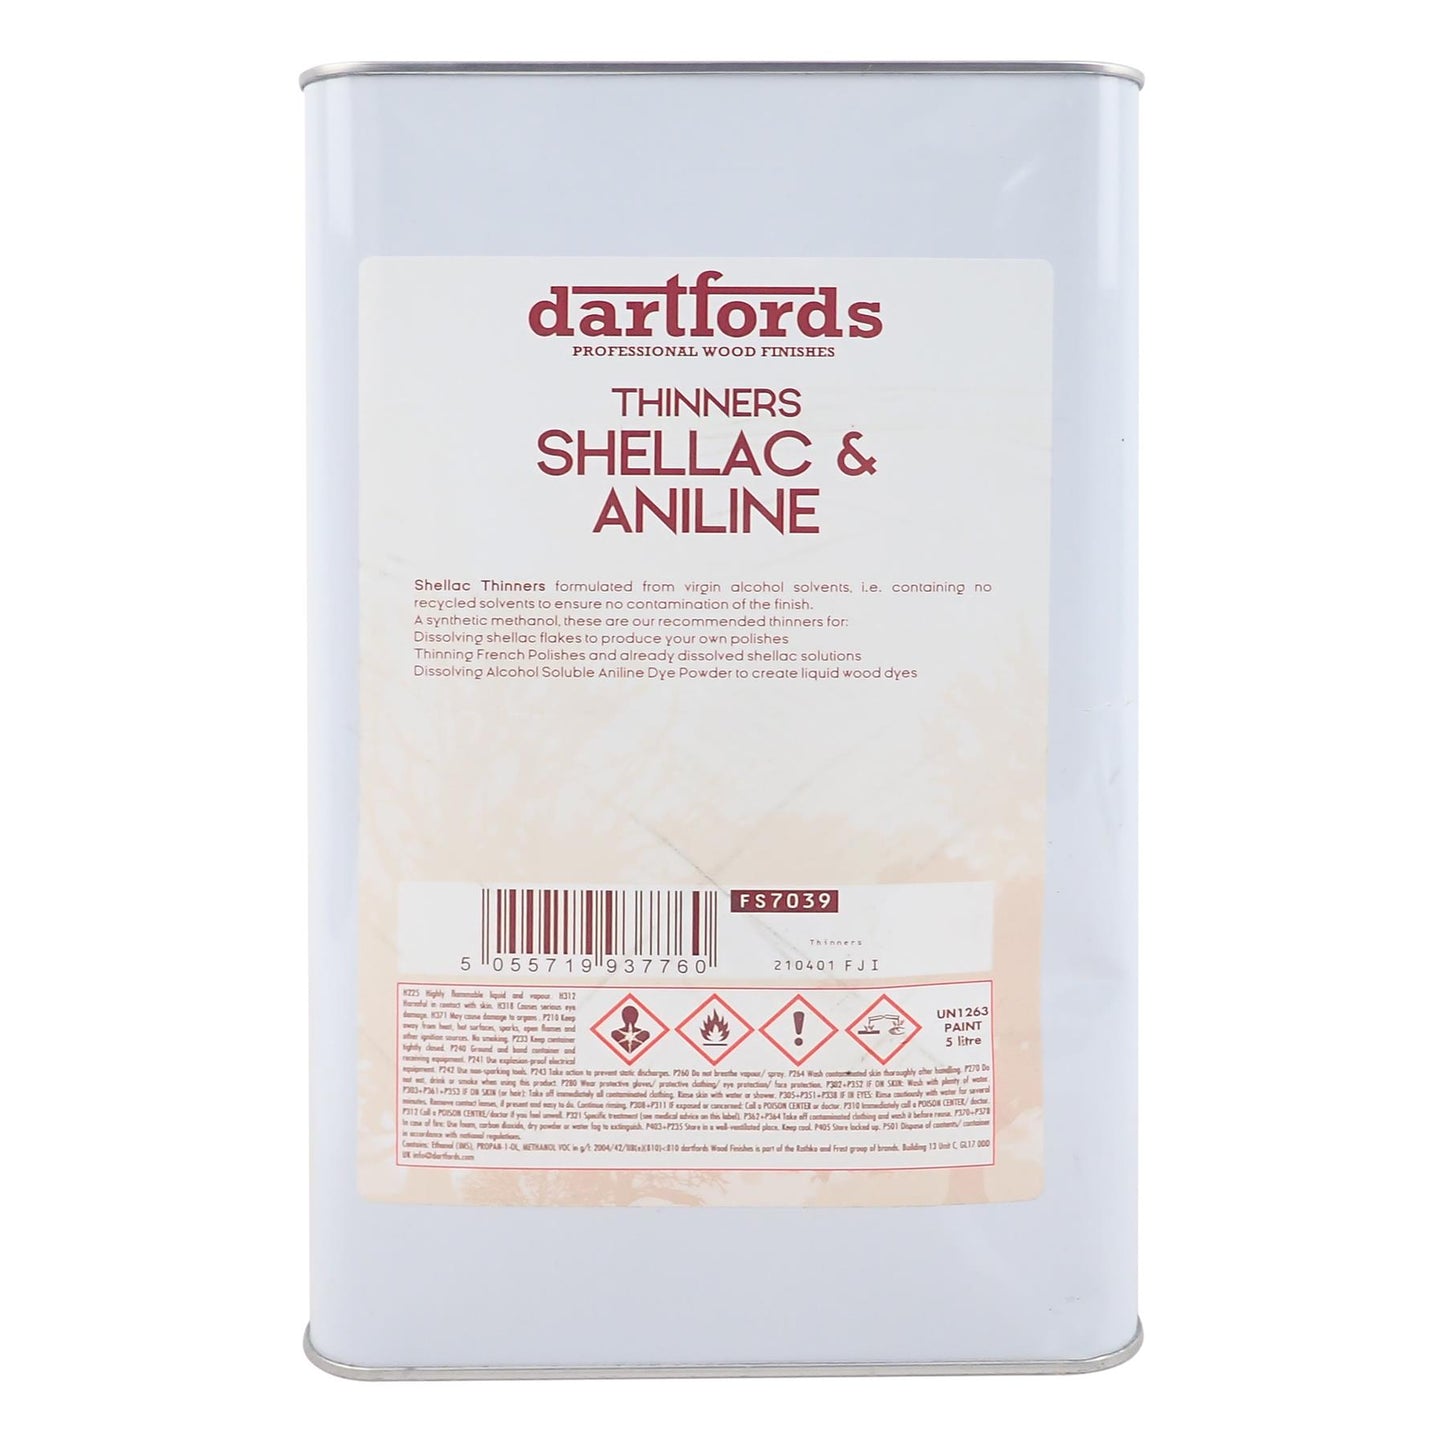 dartfords Shellac and Aniline Thinners - 5 litre Jerrycan